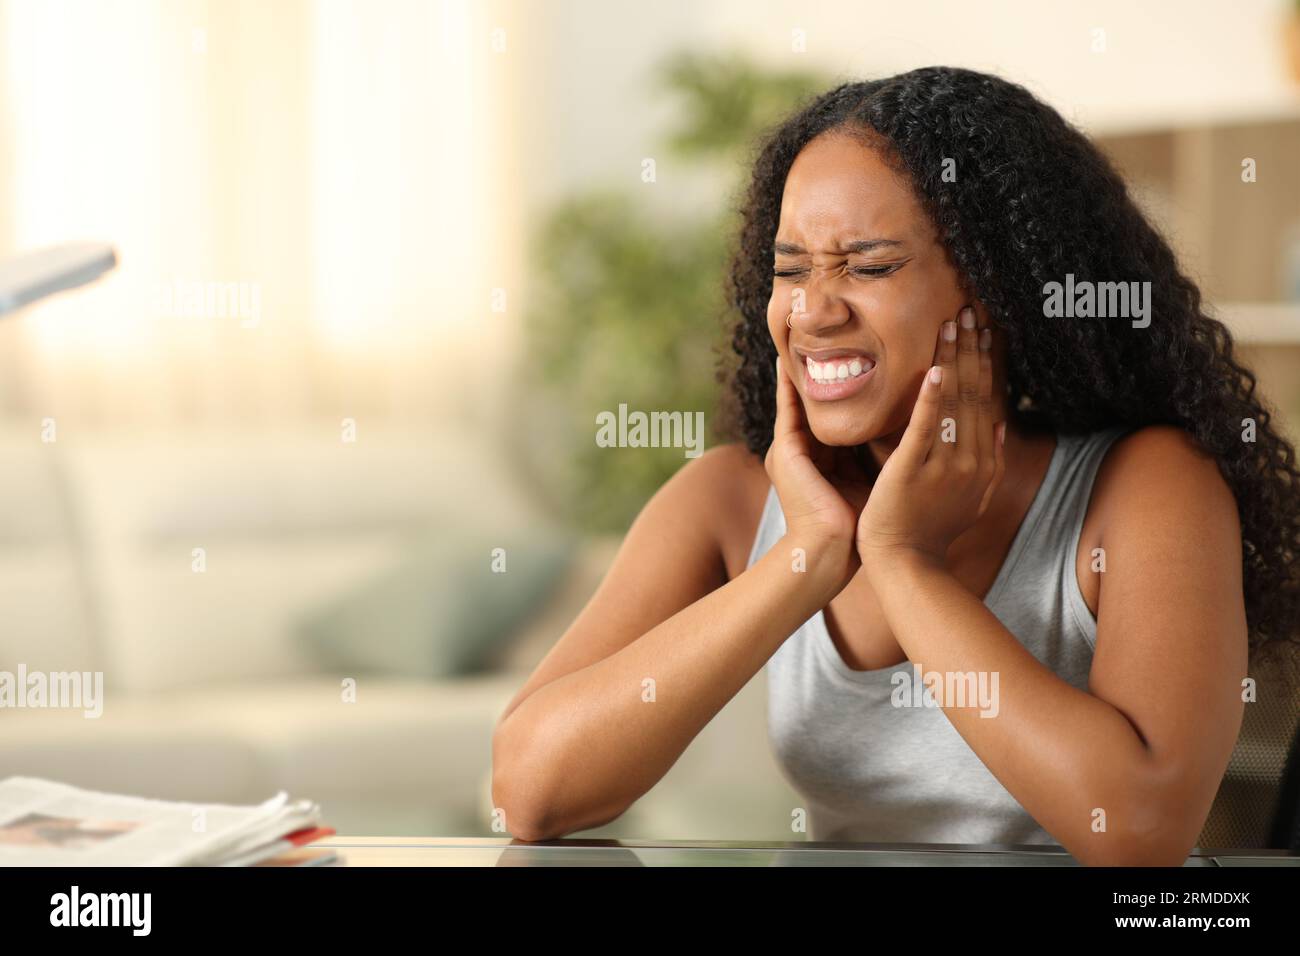 Black woman suffering tmj complaining sitting at home Stock Photo